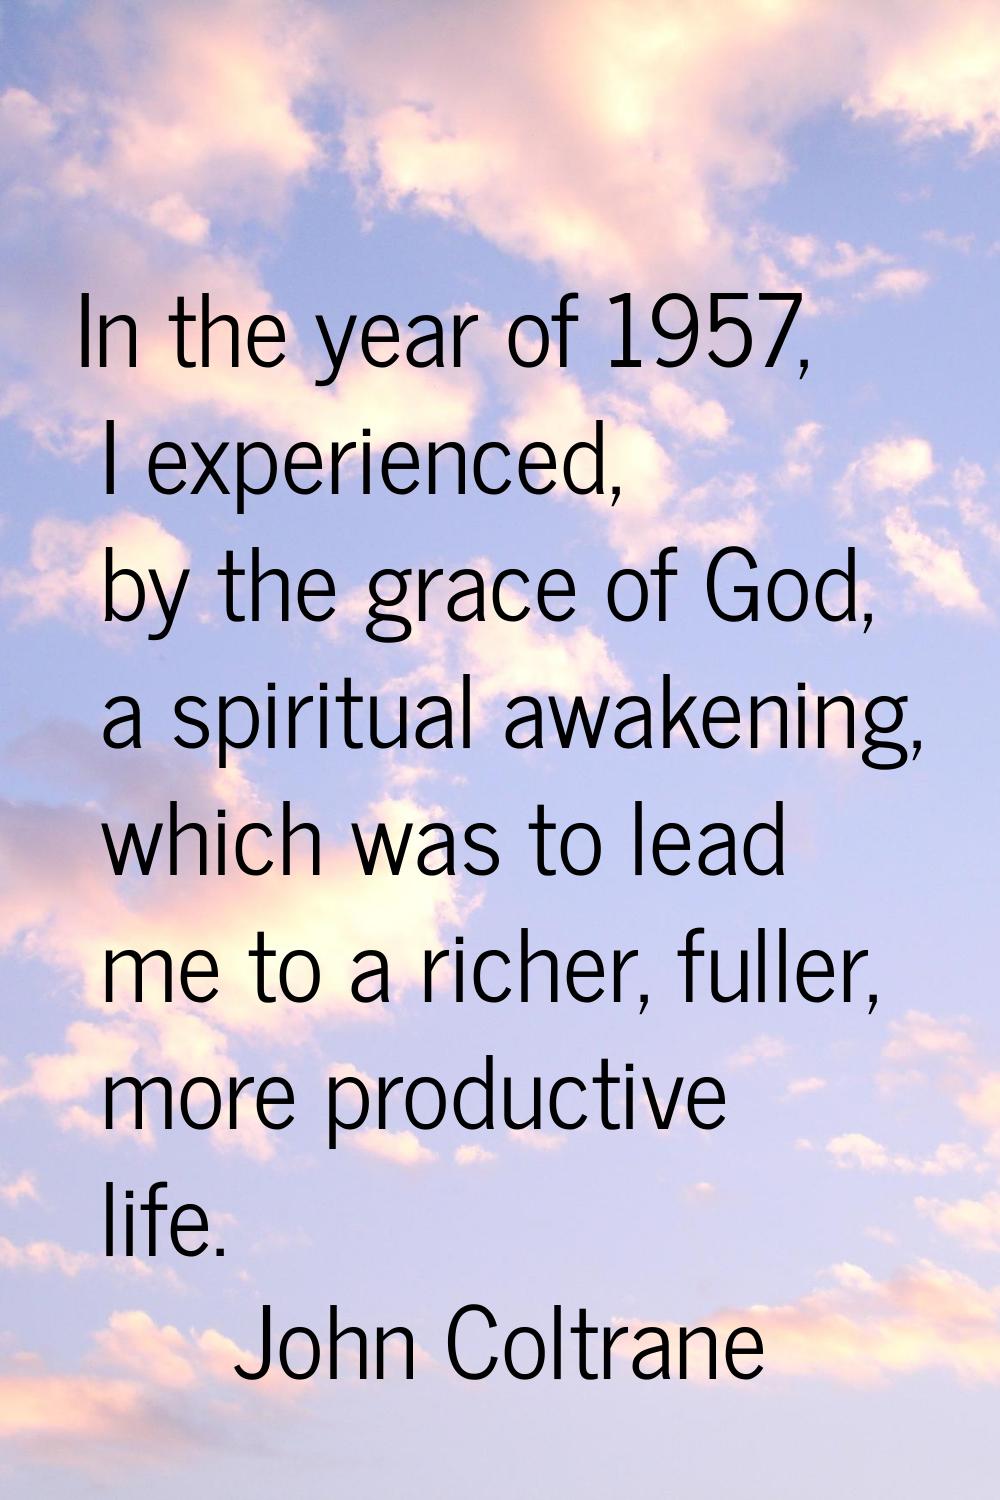 In the year of 1957, I experienced, by the grace of God, a spiritual awakening, which was to lead m